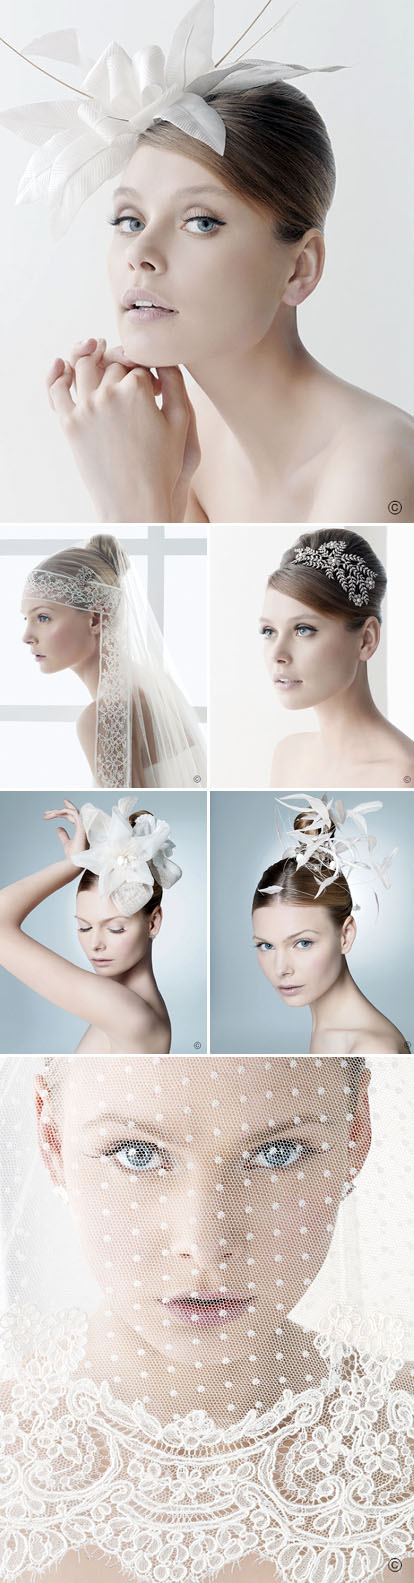 wedding veils, hair accessories, and headpieces by Rosa Clara